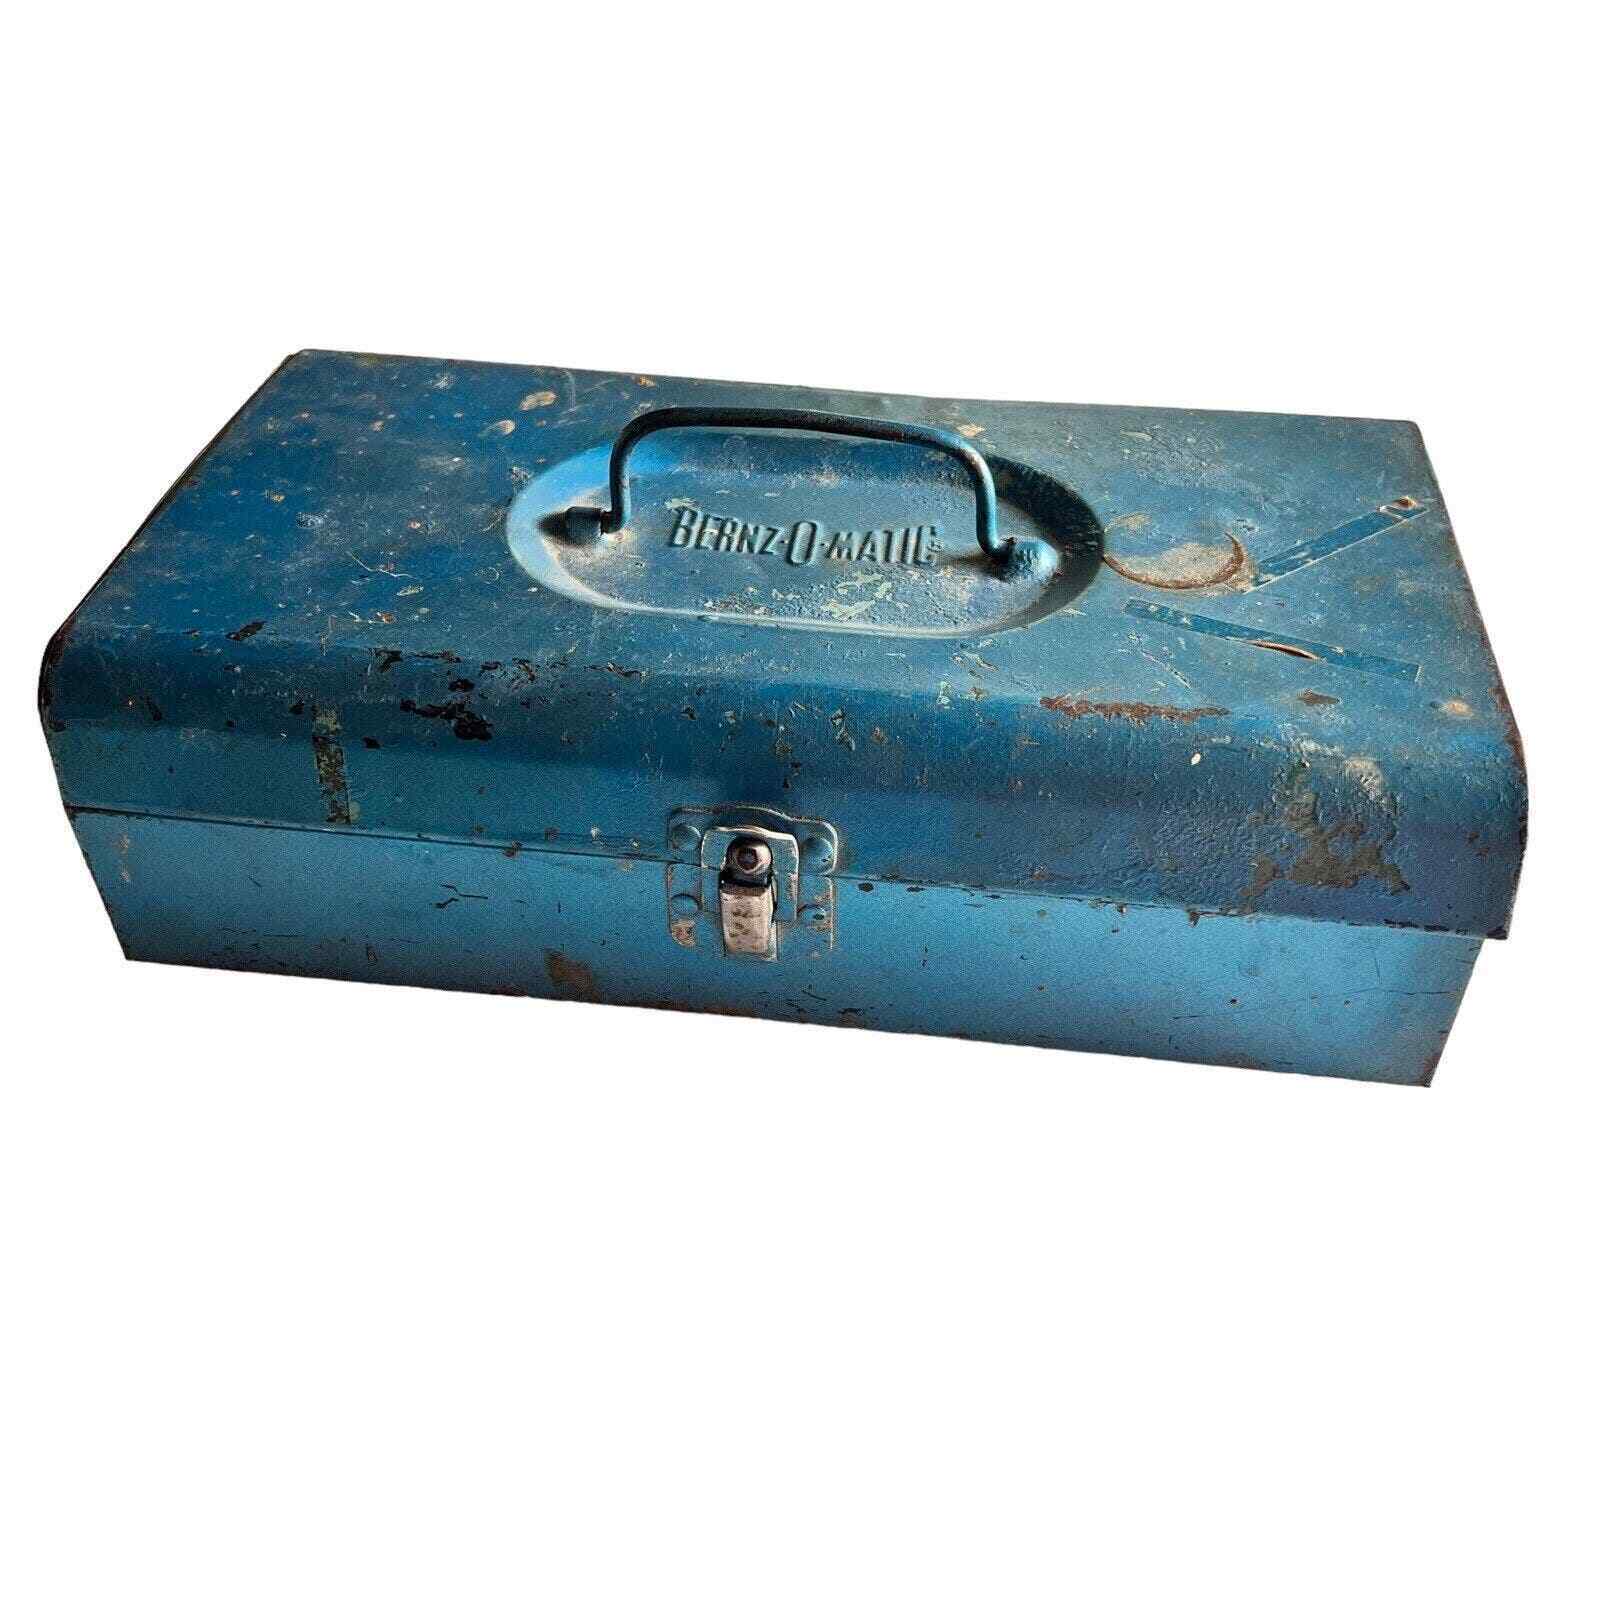 Small Vintage Blue Bernz o matic Metal Toolbox Tackle Case Chest Handle 11\